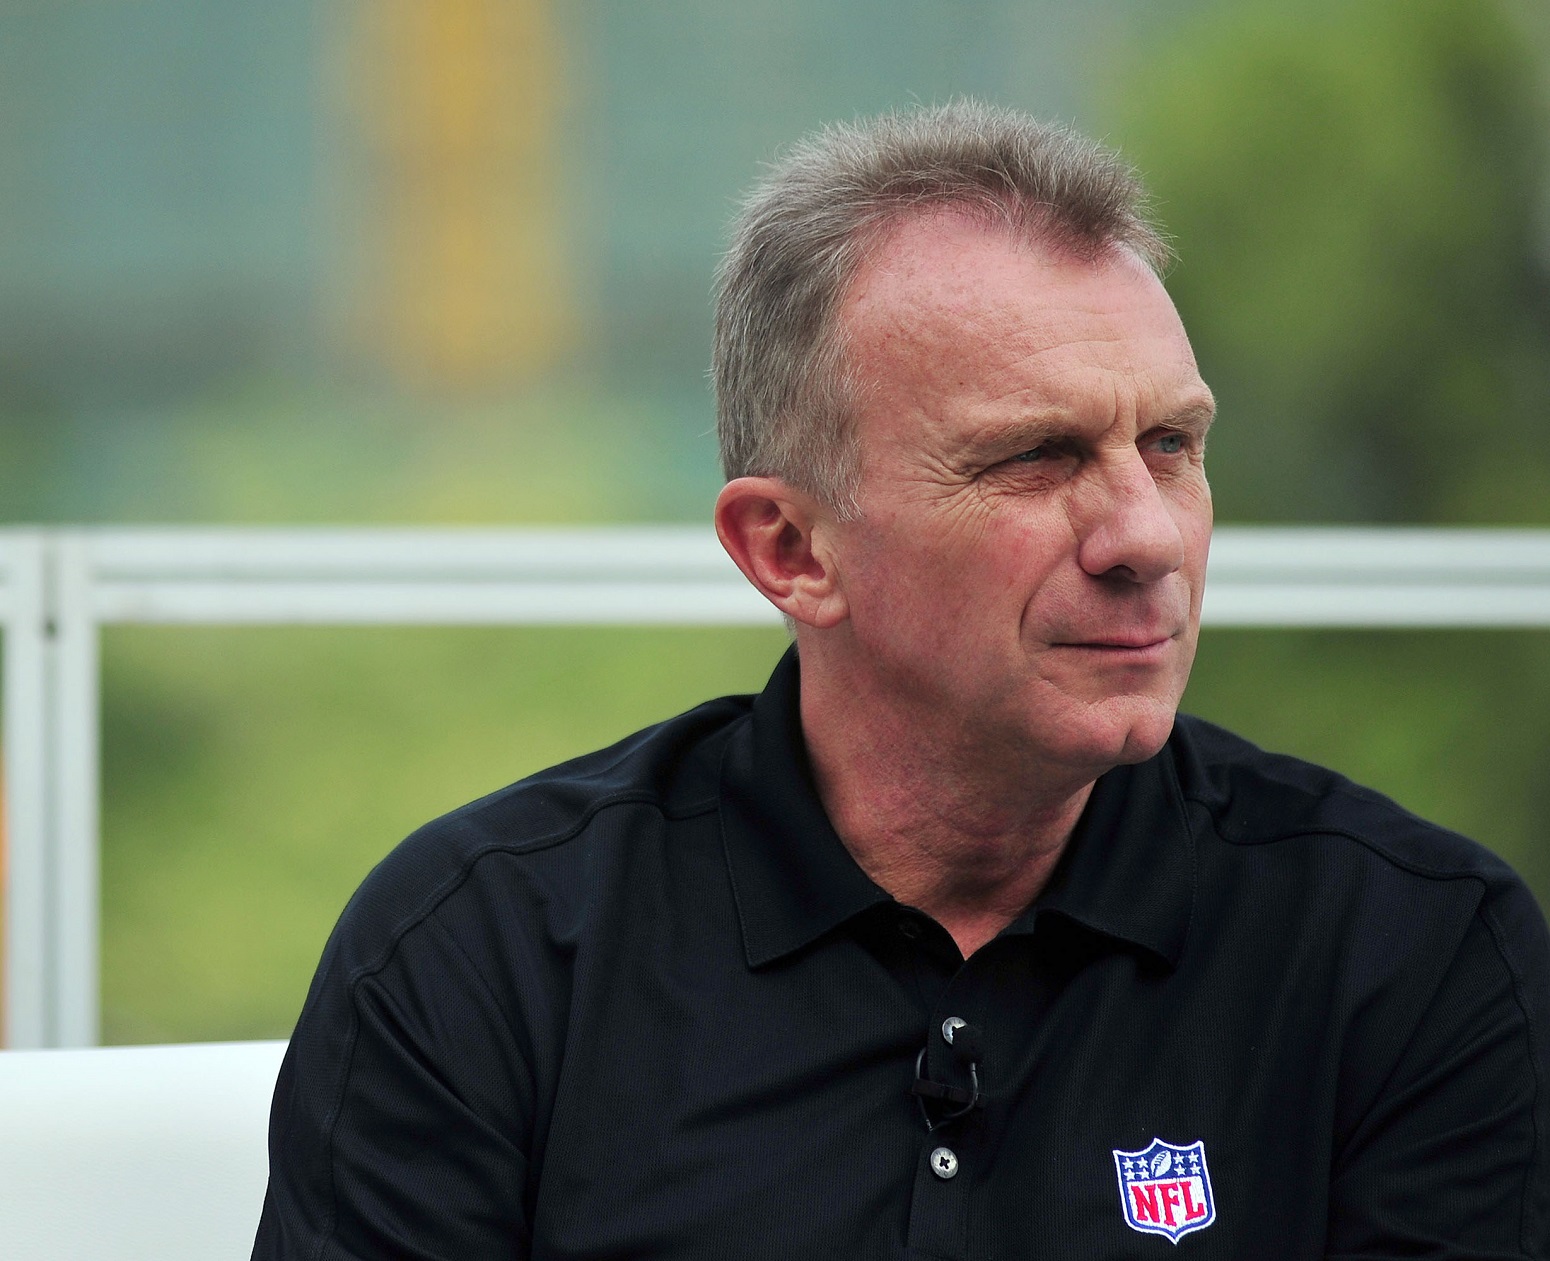 Joe Montana Just Avoided a Tragic Situation With a Heroic Act